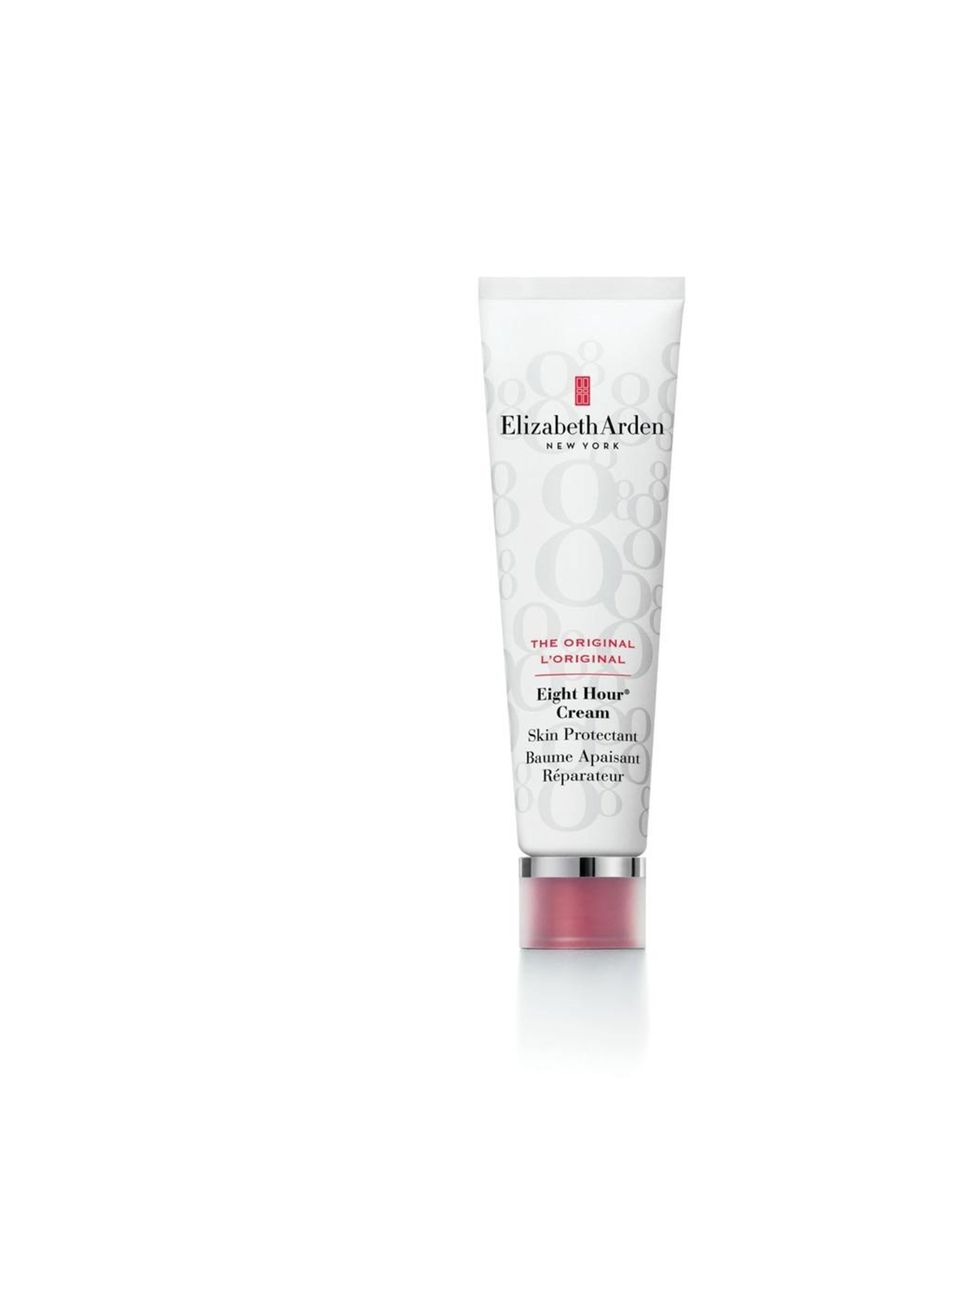 <p><a href="http://www.boots.com/en/Elizabeth-Arden-Eight-Hour-Cream-Skin-Protectant-50ml_9783/">Elizabeth Arden 8 hour cream, £25</a></p><p>Today one tube of this multi-purpose balm is sold every 30 seconds (one every two minutes in the UK alone).</p><p>